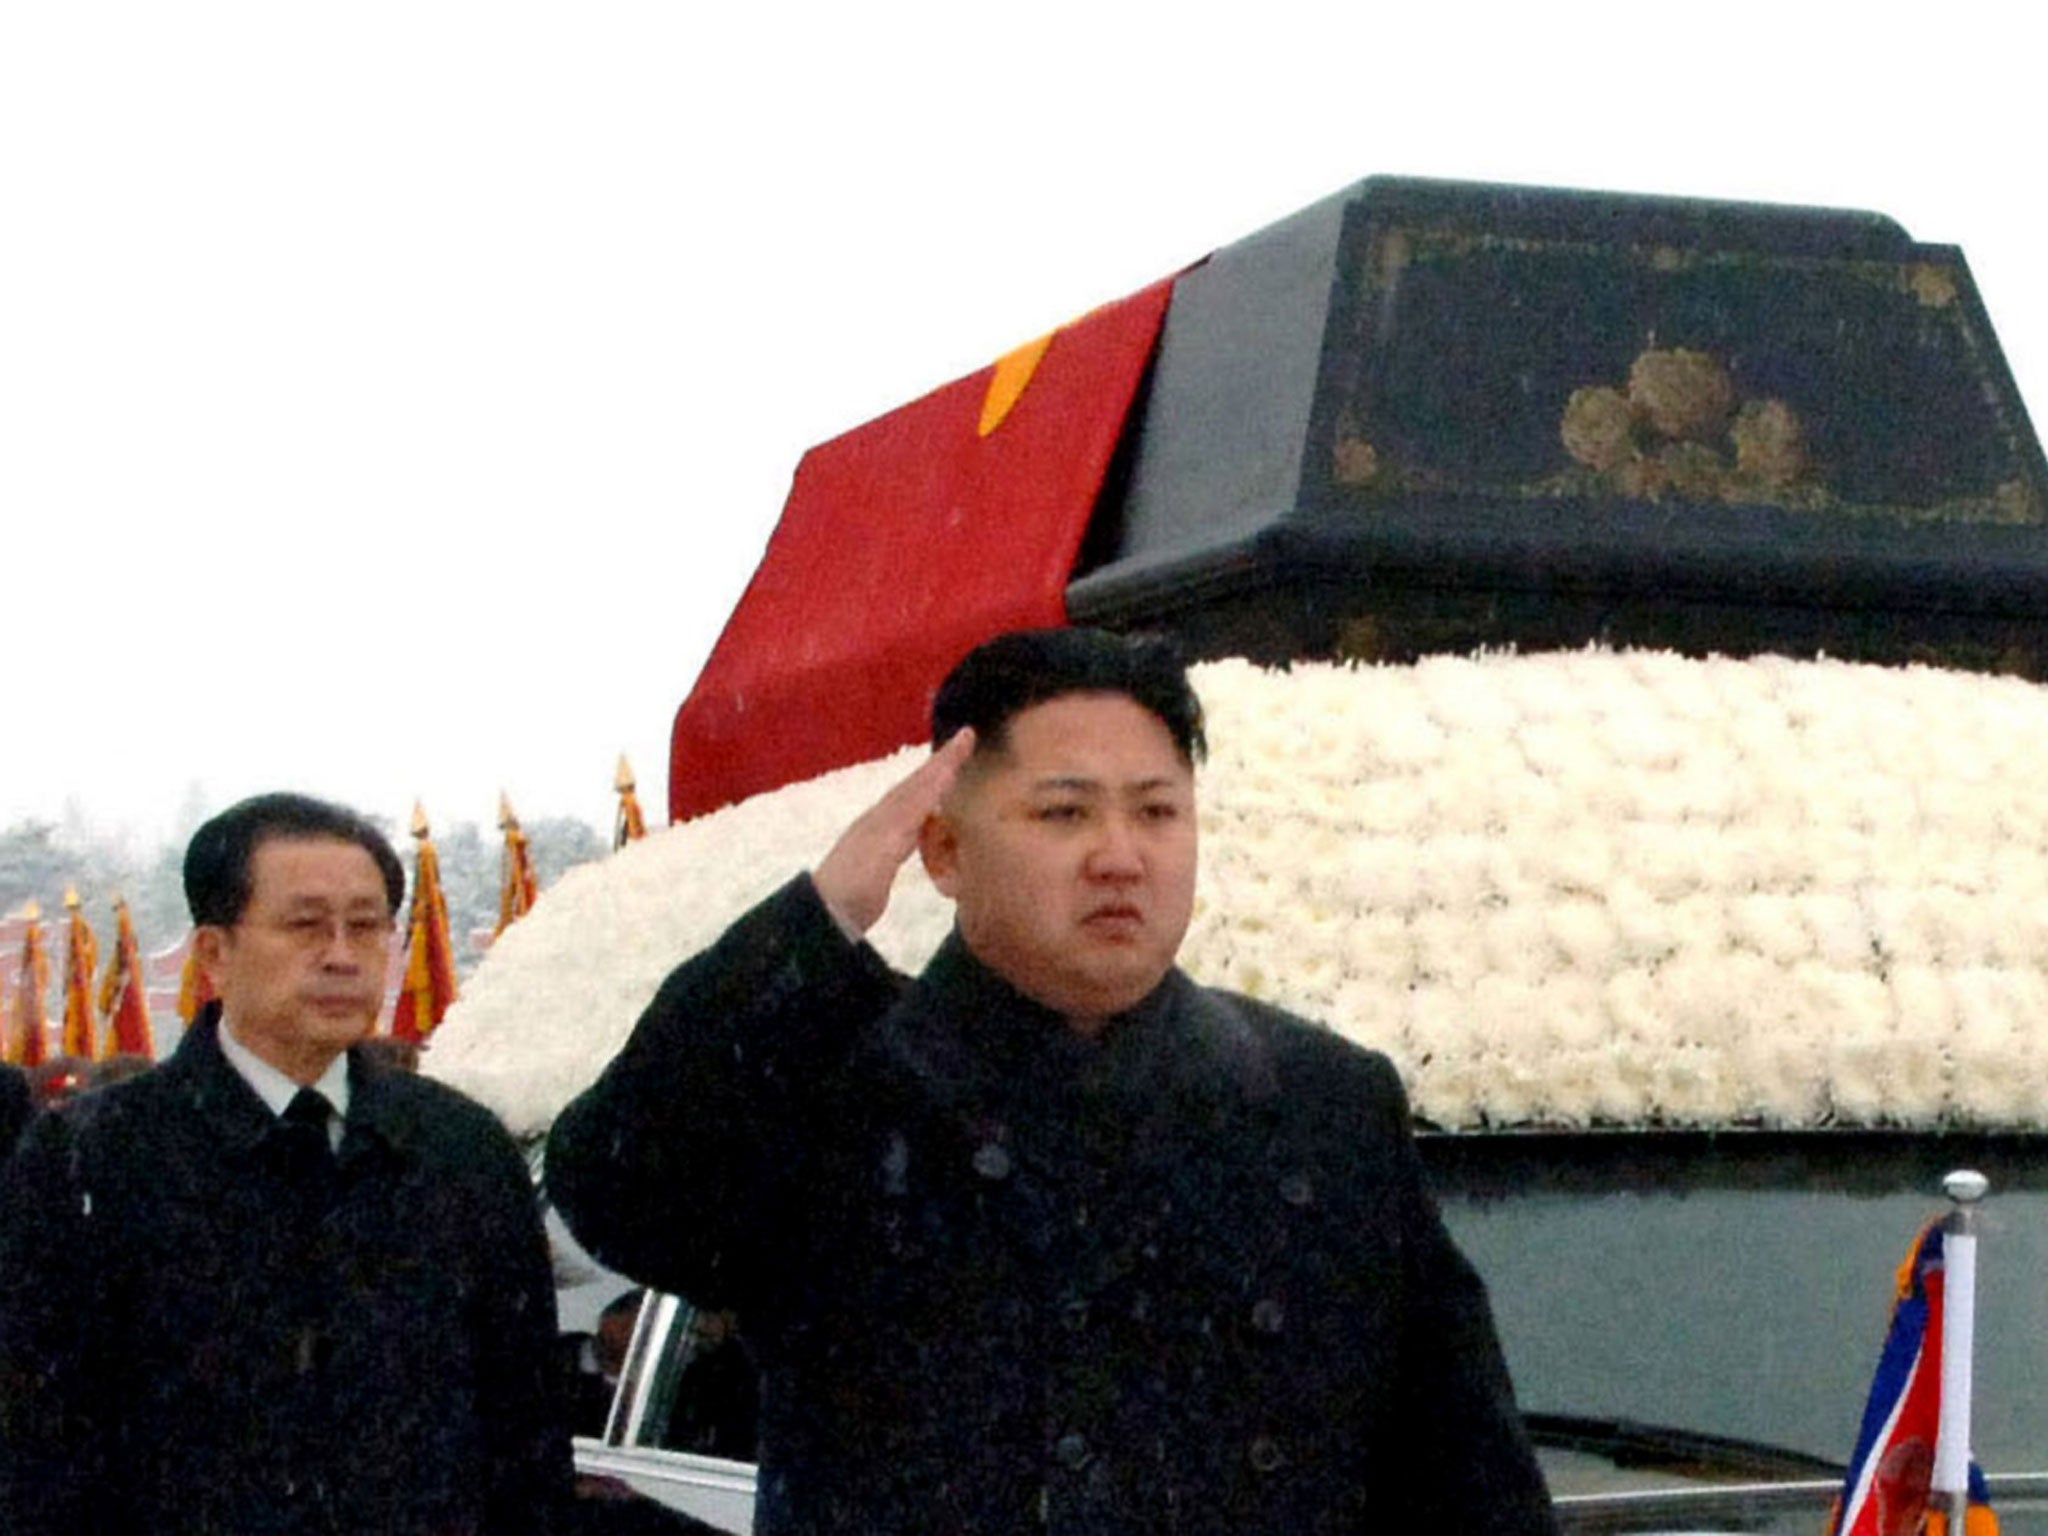 North Korea's Kim Jong Un, front, salutes beside the hearse carrying the body of his late father and then North Korean leader Kim Jong Il during the funeral procession in Pyongyang, North Korea as Jang Song Thaek follows